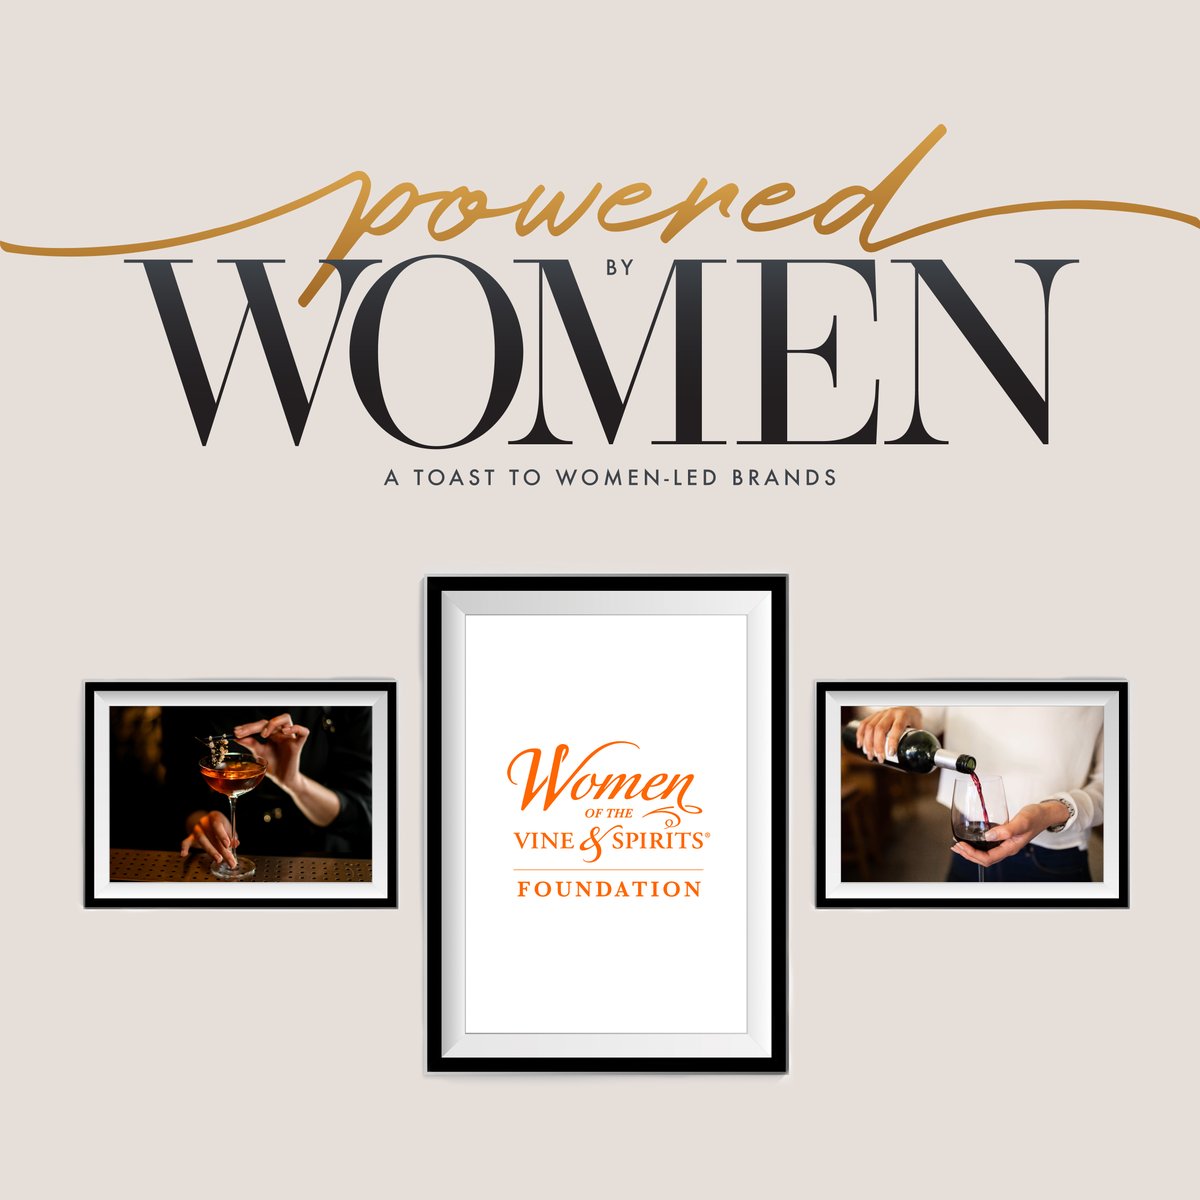 For #WomensHistoryMonth, #RNDC is excited to team up again with @WomenoftheVine Foundation for another year to support their Foundation with scholarship contributions for rising females in the food, wine, spirits, beer, and hospitality industries. #RNDCxWOTVS #WomenWednesday #DEI